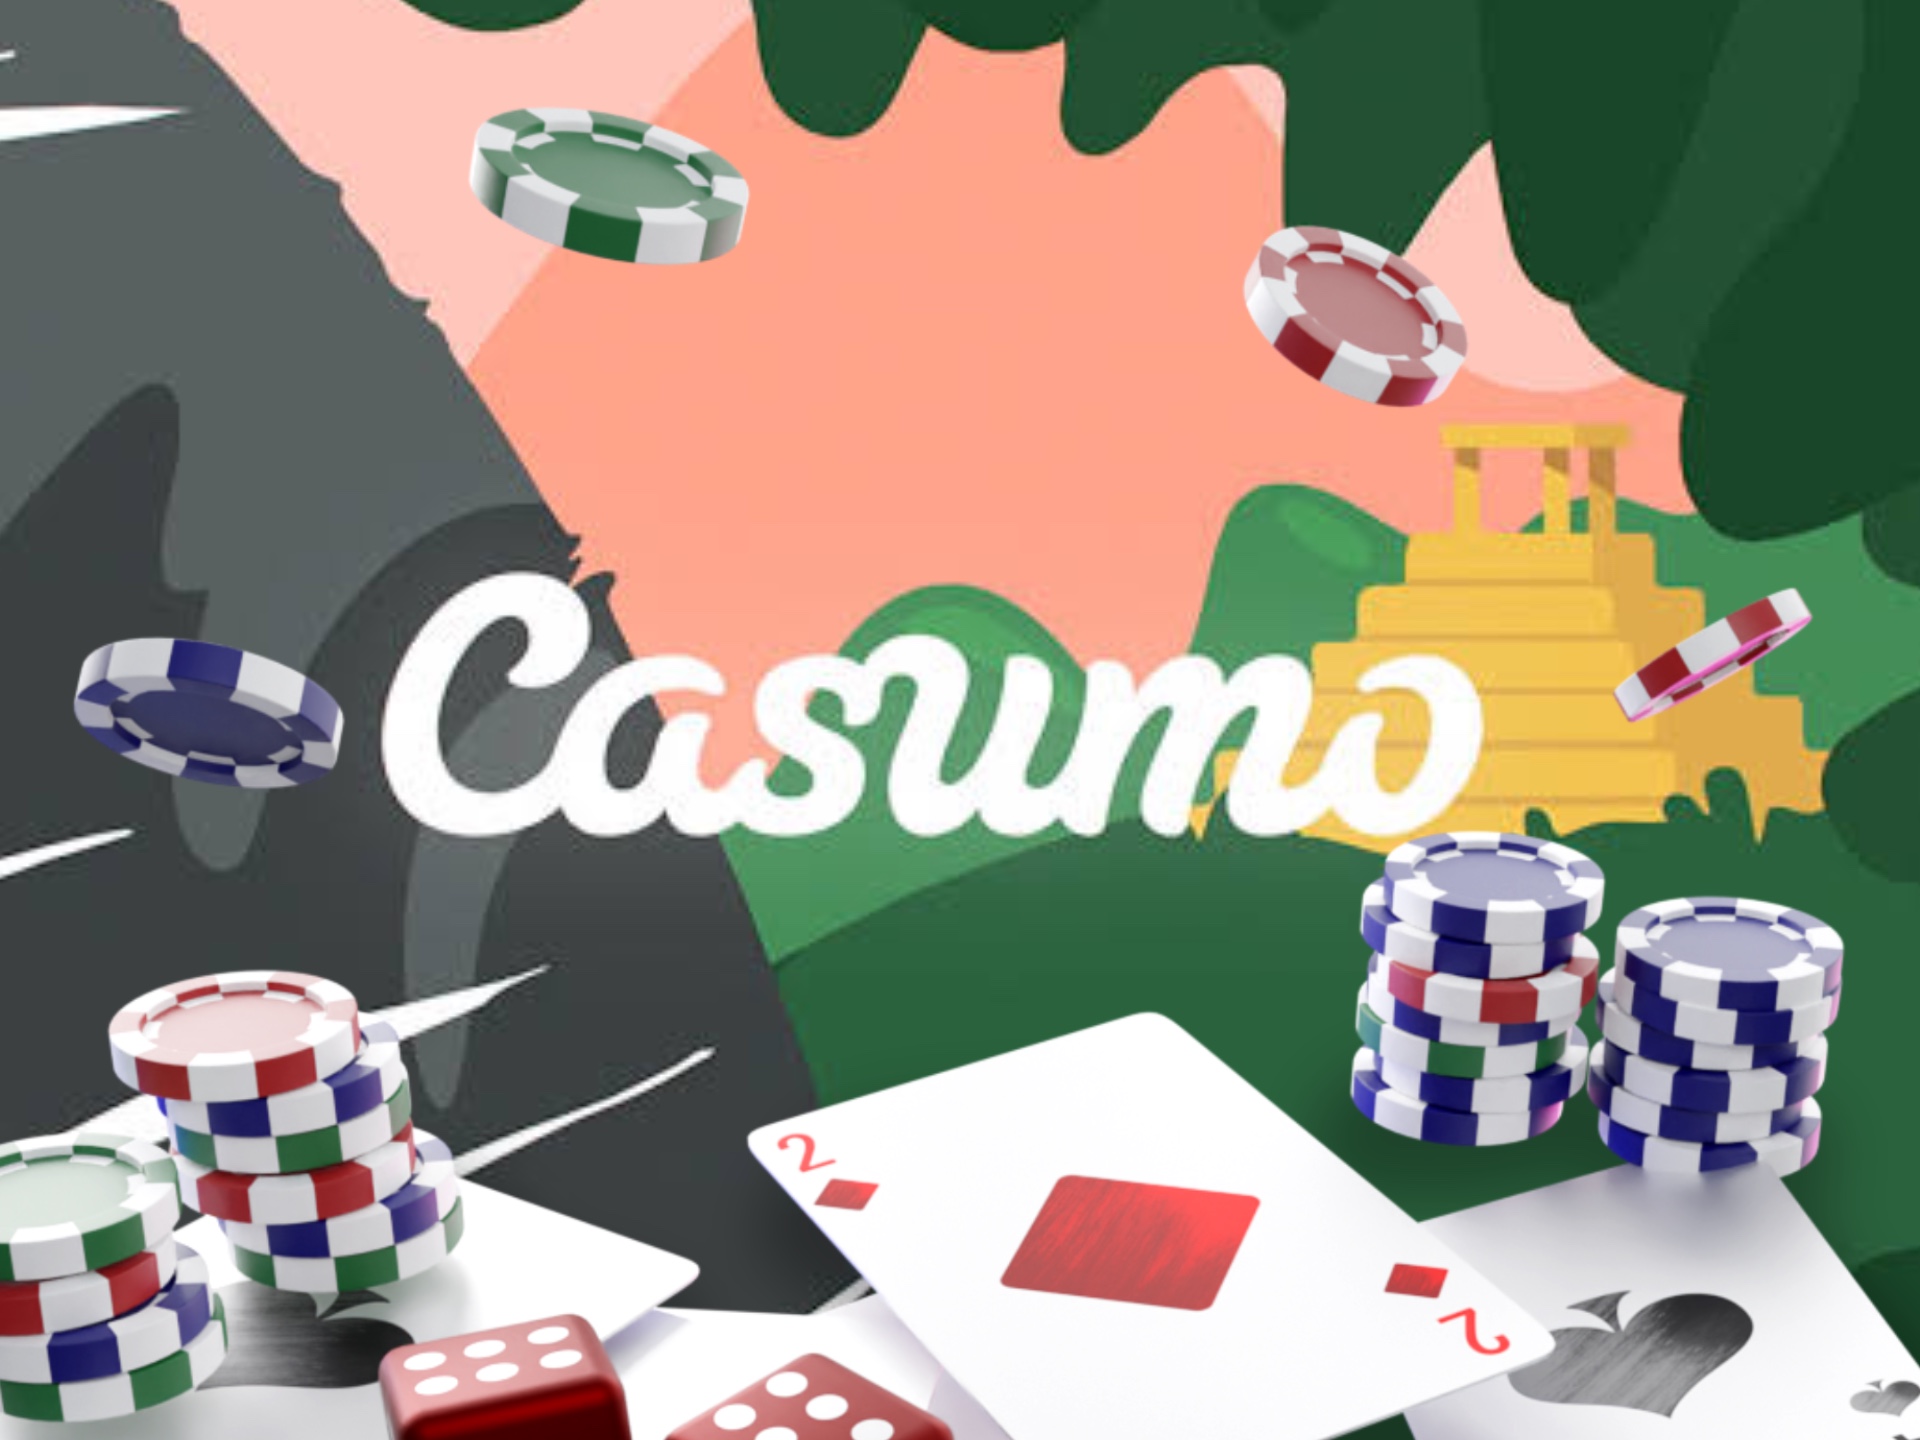 Sign ip for Casumo casino and make your first deposit with UPI.